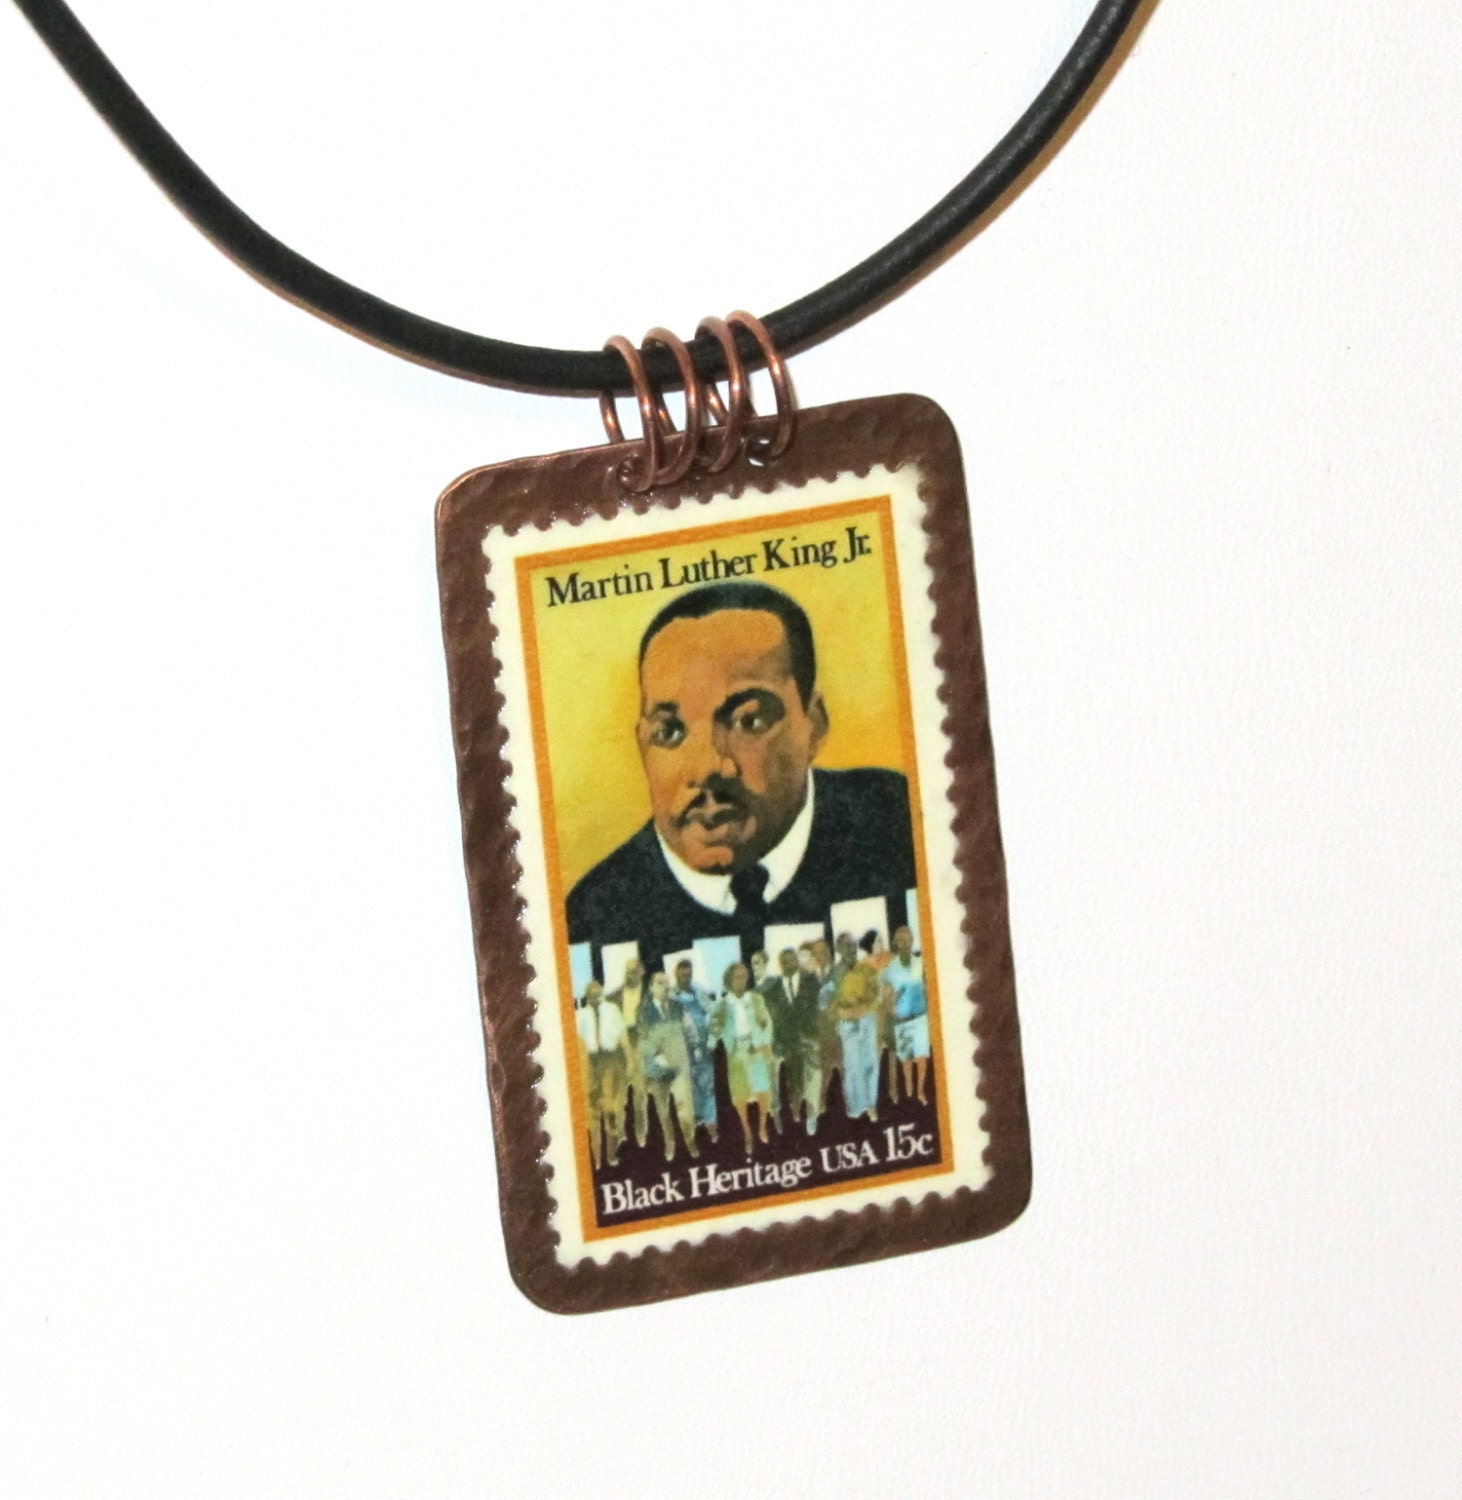 ON SALE - MLK weekend - Martin Luther King Jr. - Postage Stamp pendant in copper and leather